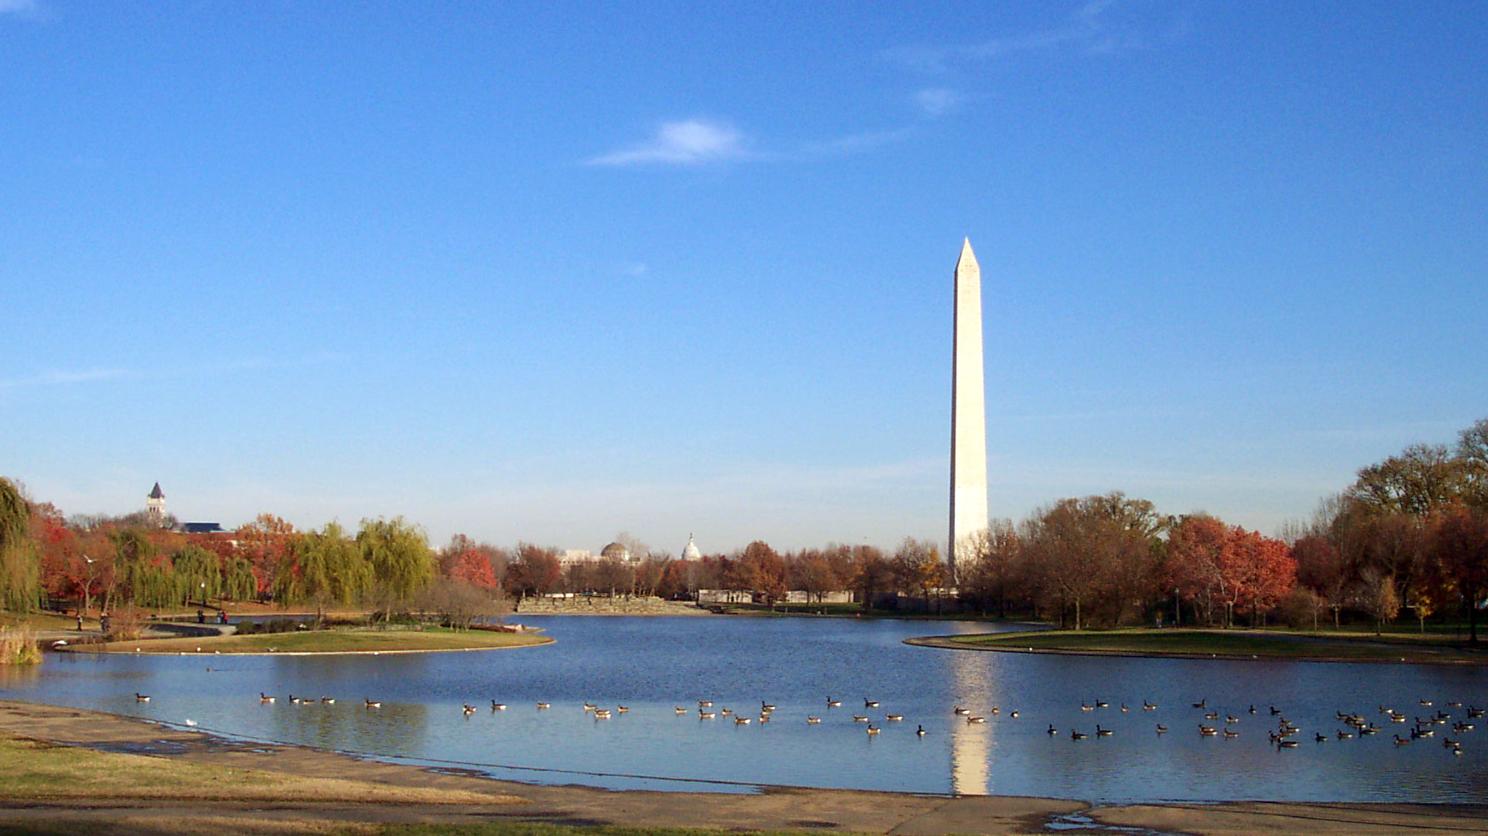 A shallow lake with geese swimming in it, in front of the Washington Monument obelisk in mid-autumn